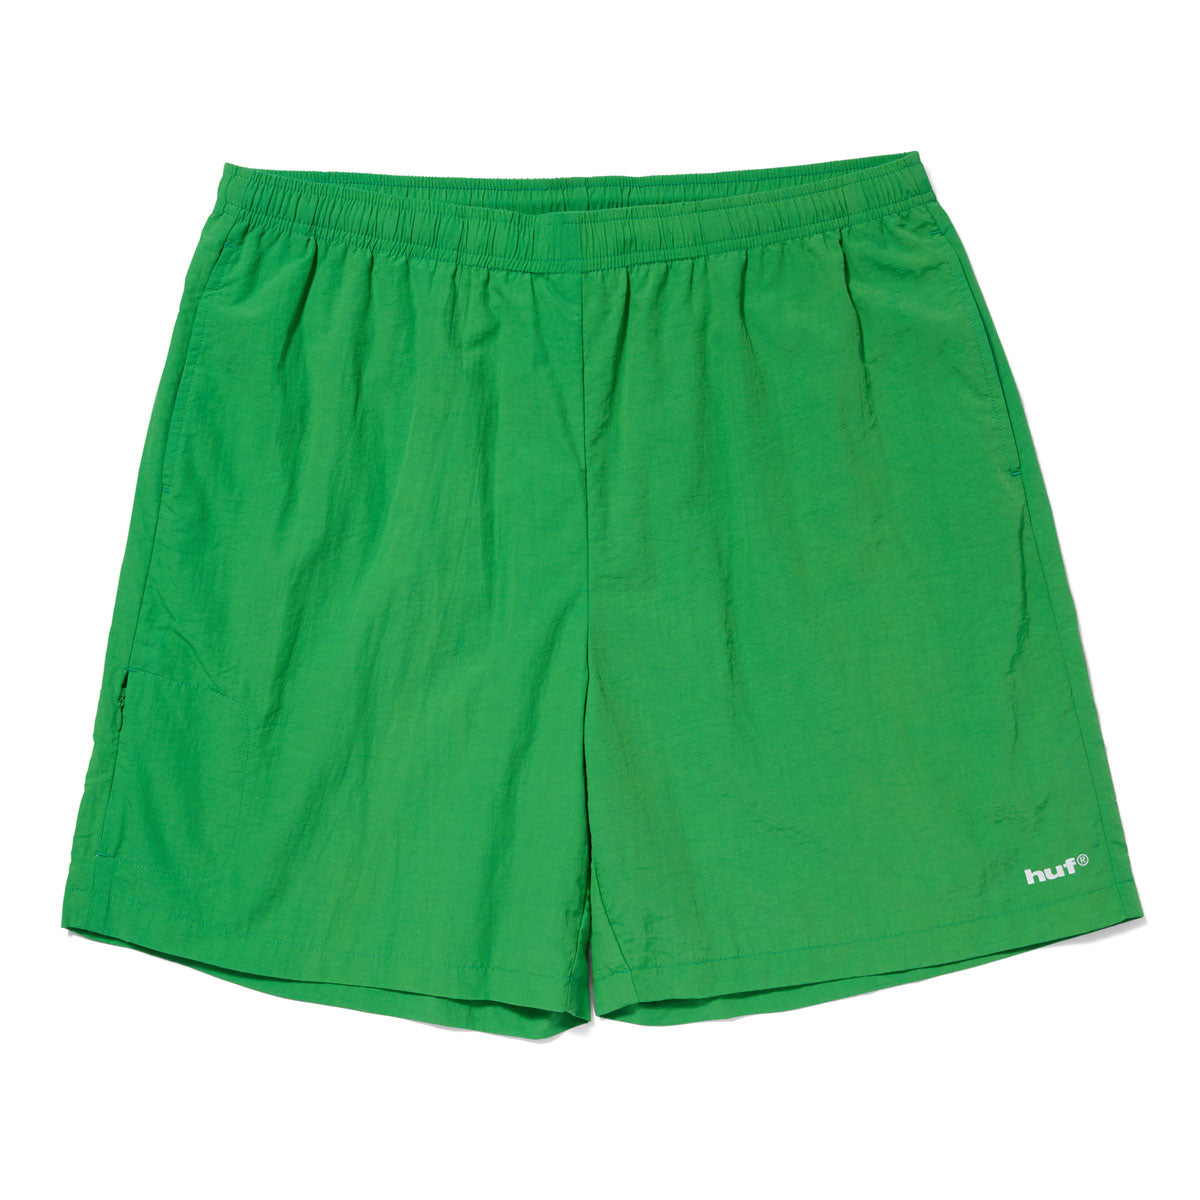 HUF Pacific Easy Shorts - Clover image 1